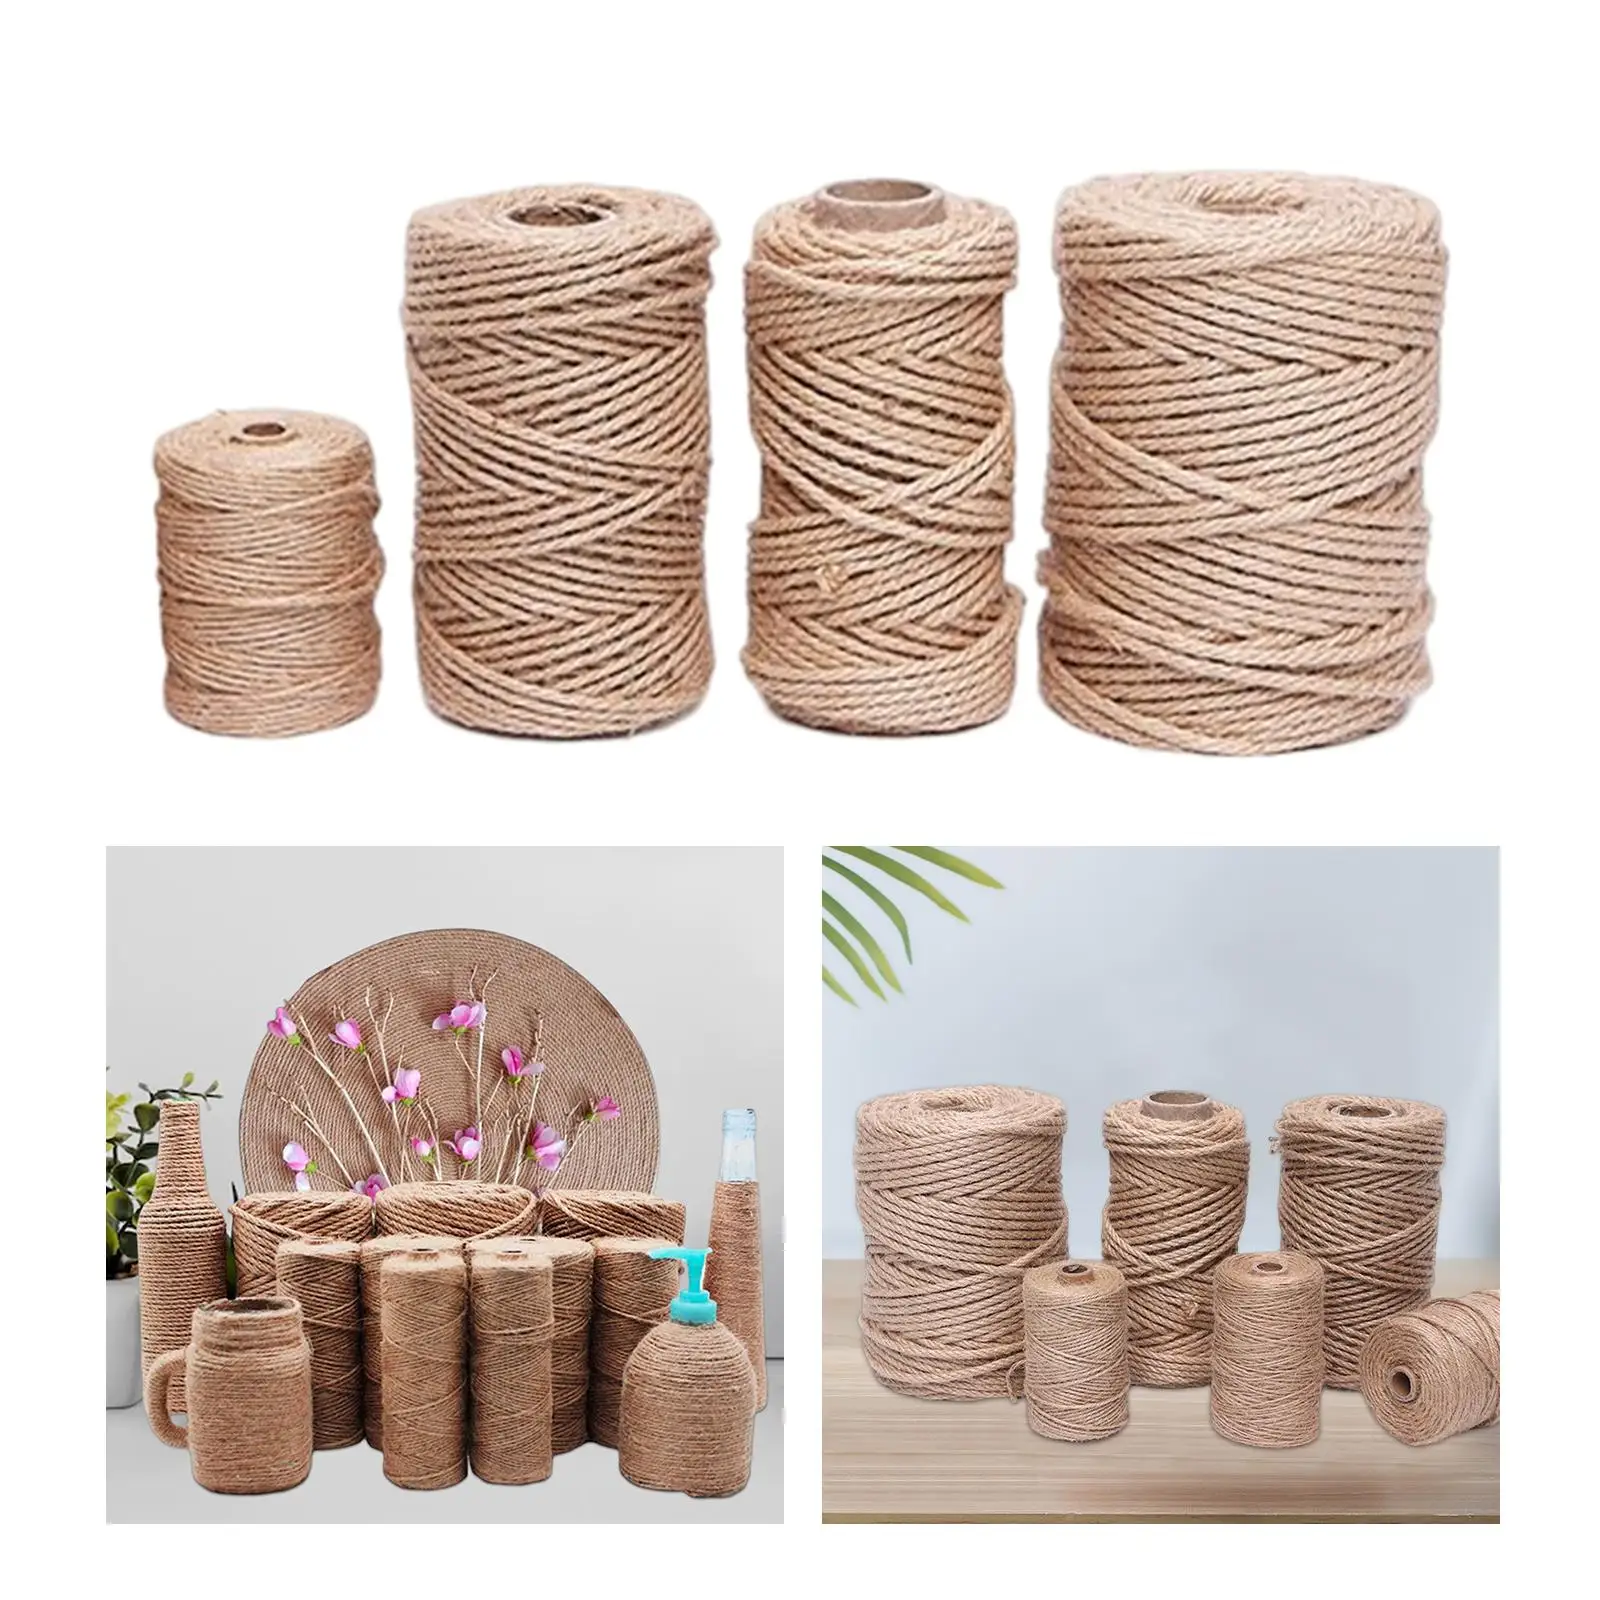 Sisal Twine Handcraft Gift Wrapping Twine Packing String Sisal Ropes for Cats Scratching Post Toys Decor DIY Projects